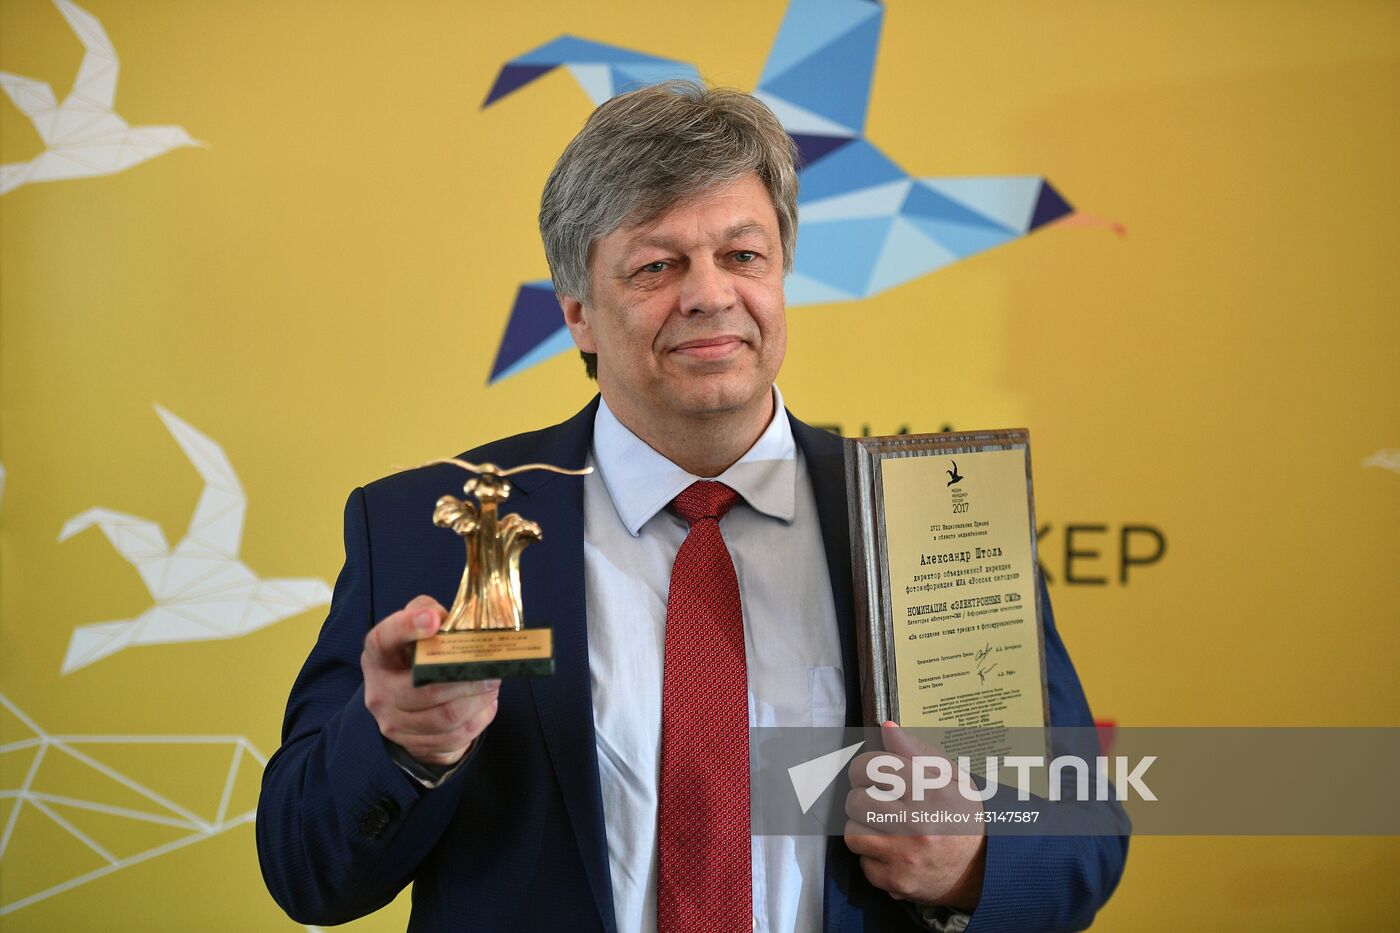 2017 Russian Media Manager awards ceremony